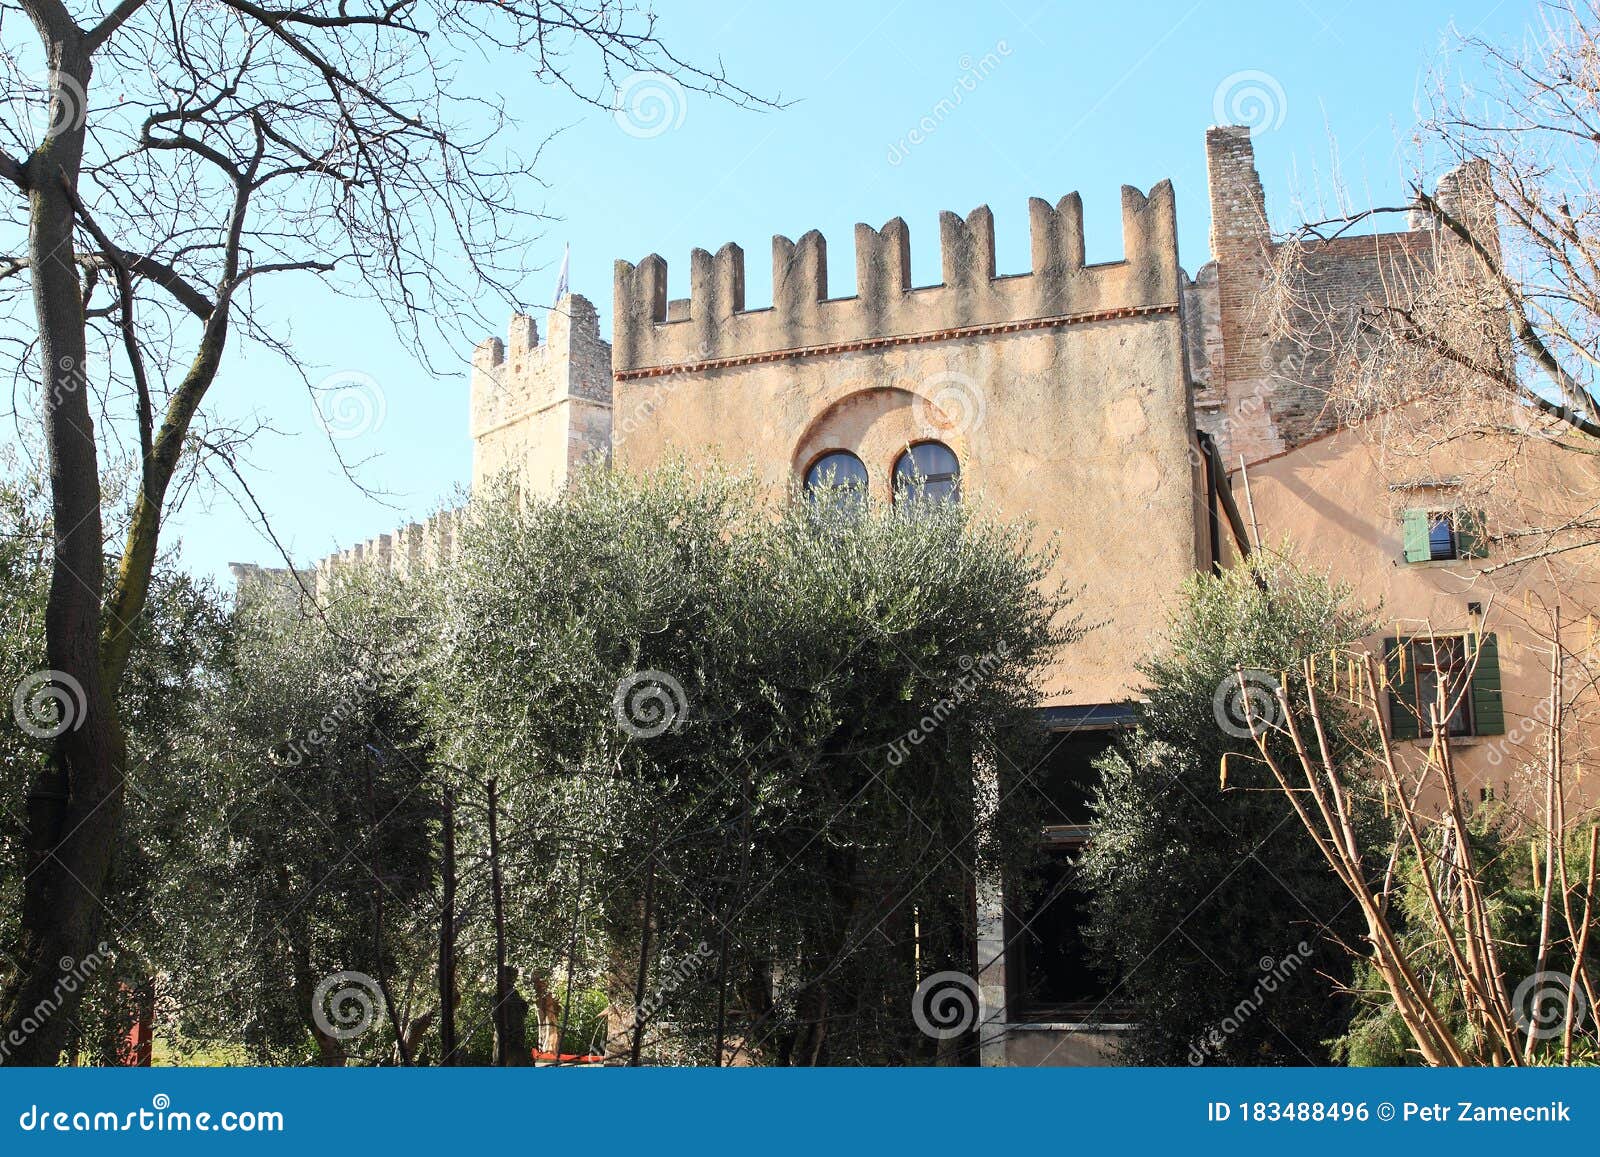 castle castello scaligero behind trees and bushes